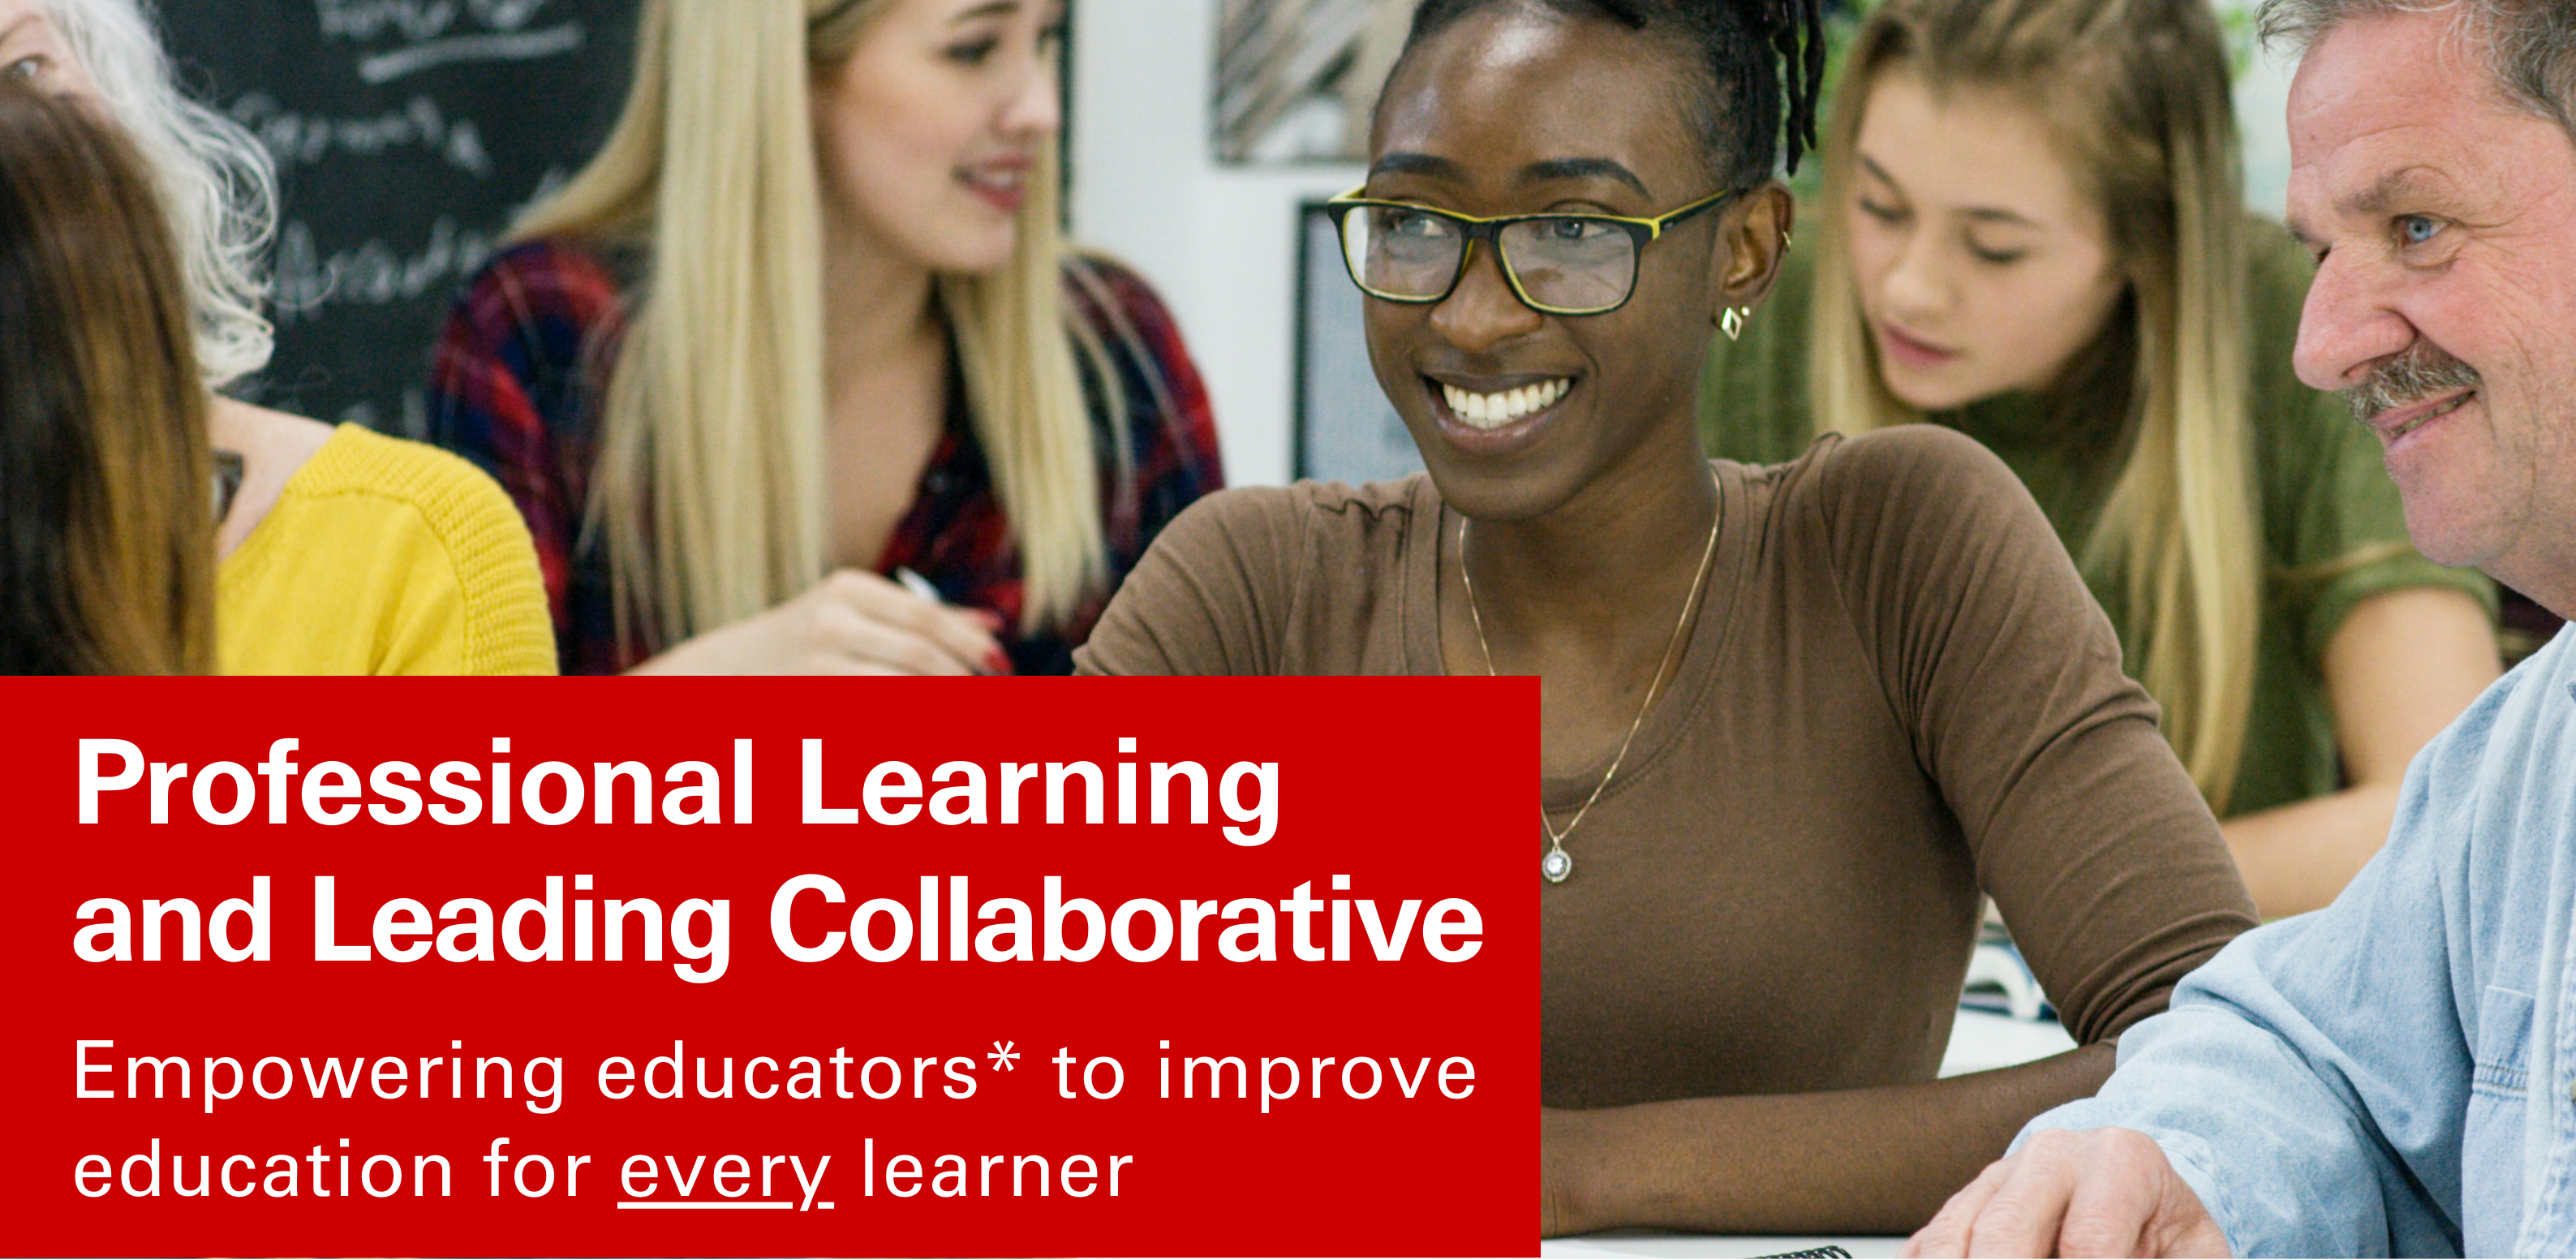 An image of a group of educators smiling and siting around a table. The text box over the image says "Professional Learning and Leading Collaborative: Empowering educators to improve education for every learner